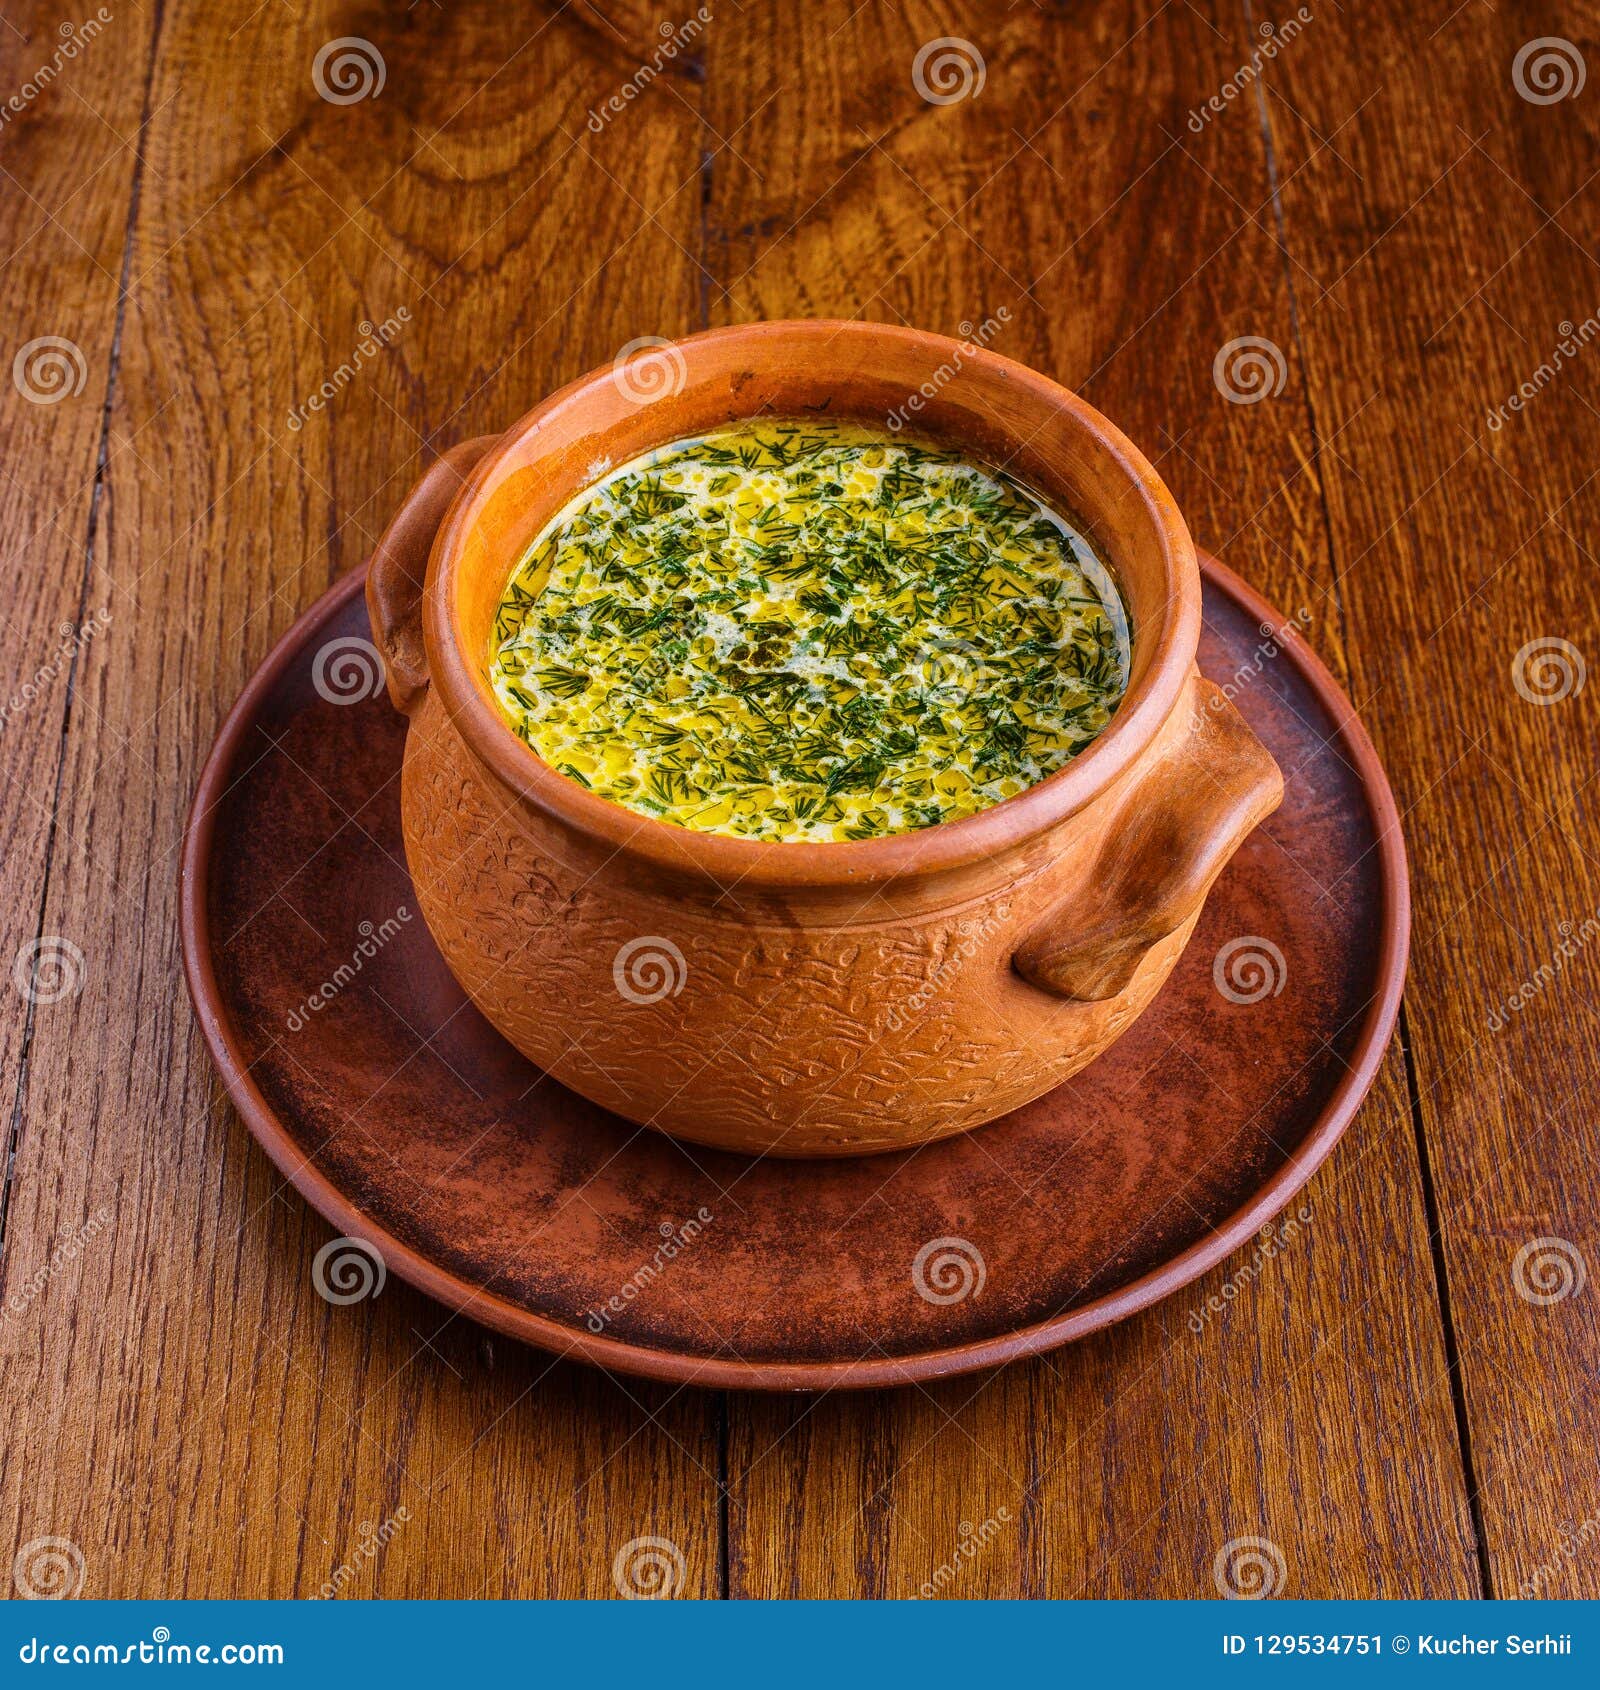 mushroom soup in a pot on a table